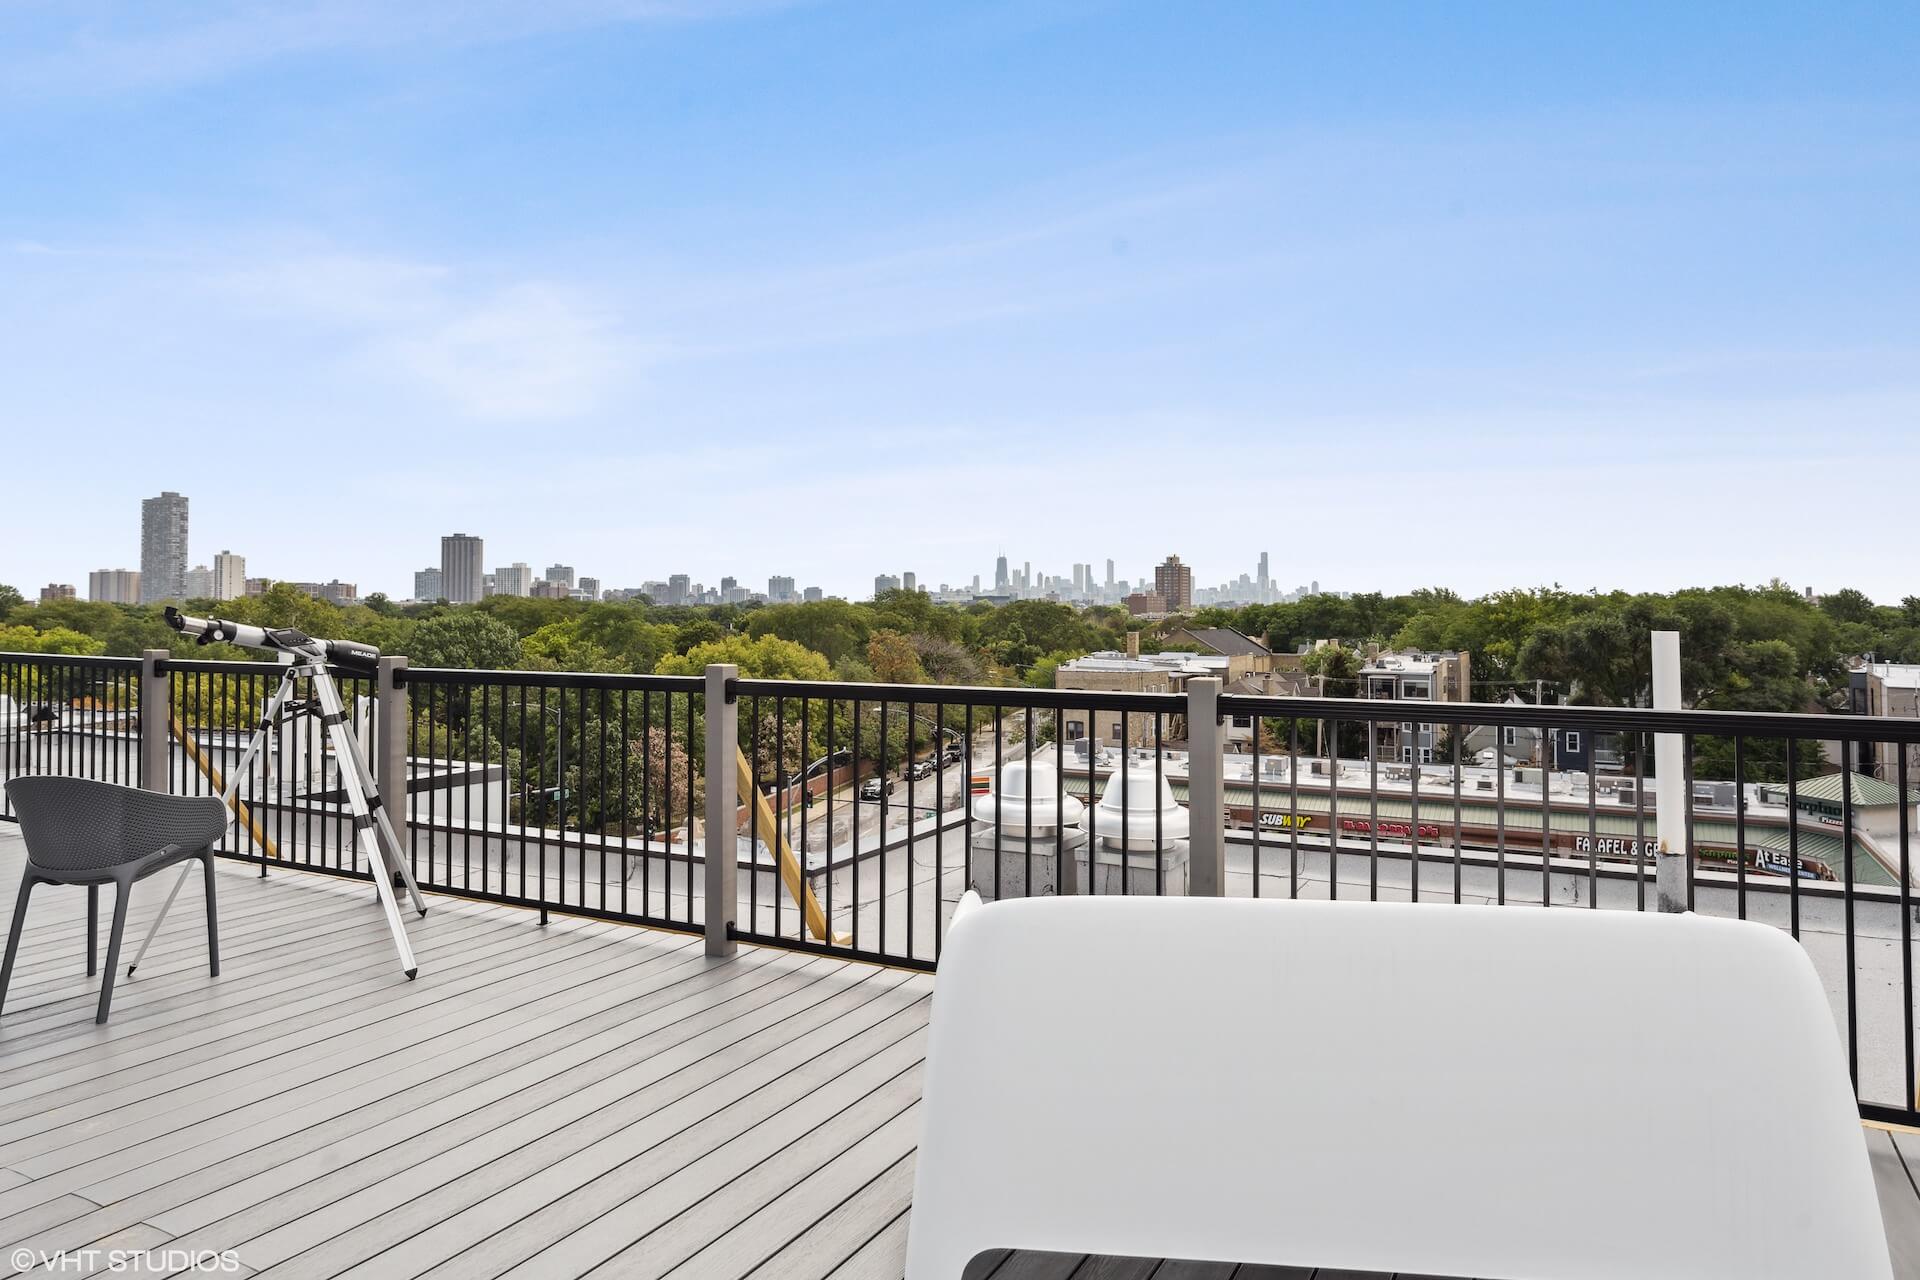 Private rooftop deck with telescope and view of the downtown Chicago skyline.